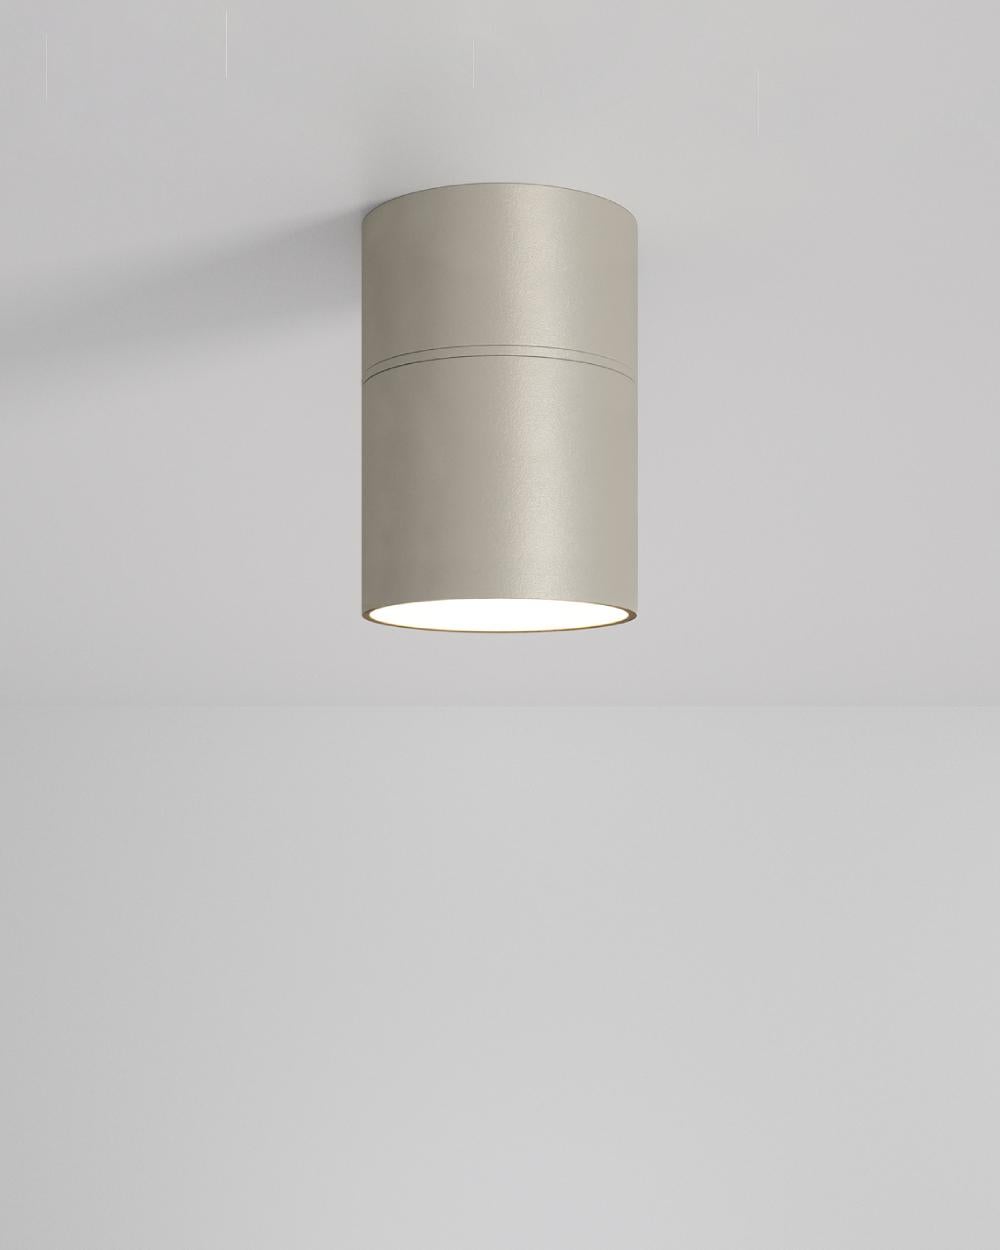 Axolight Small Pivot Ceiling Lamp in White by Ryosuke Fukusada In New Condition For Sale In Brooklyn, NY